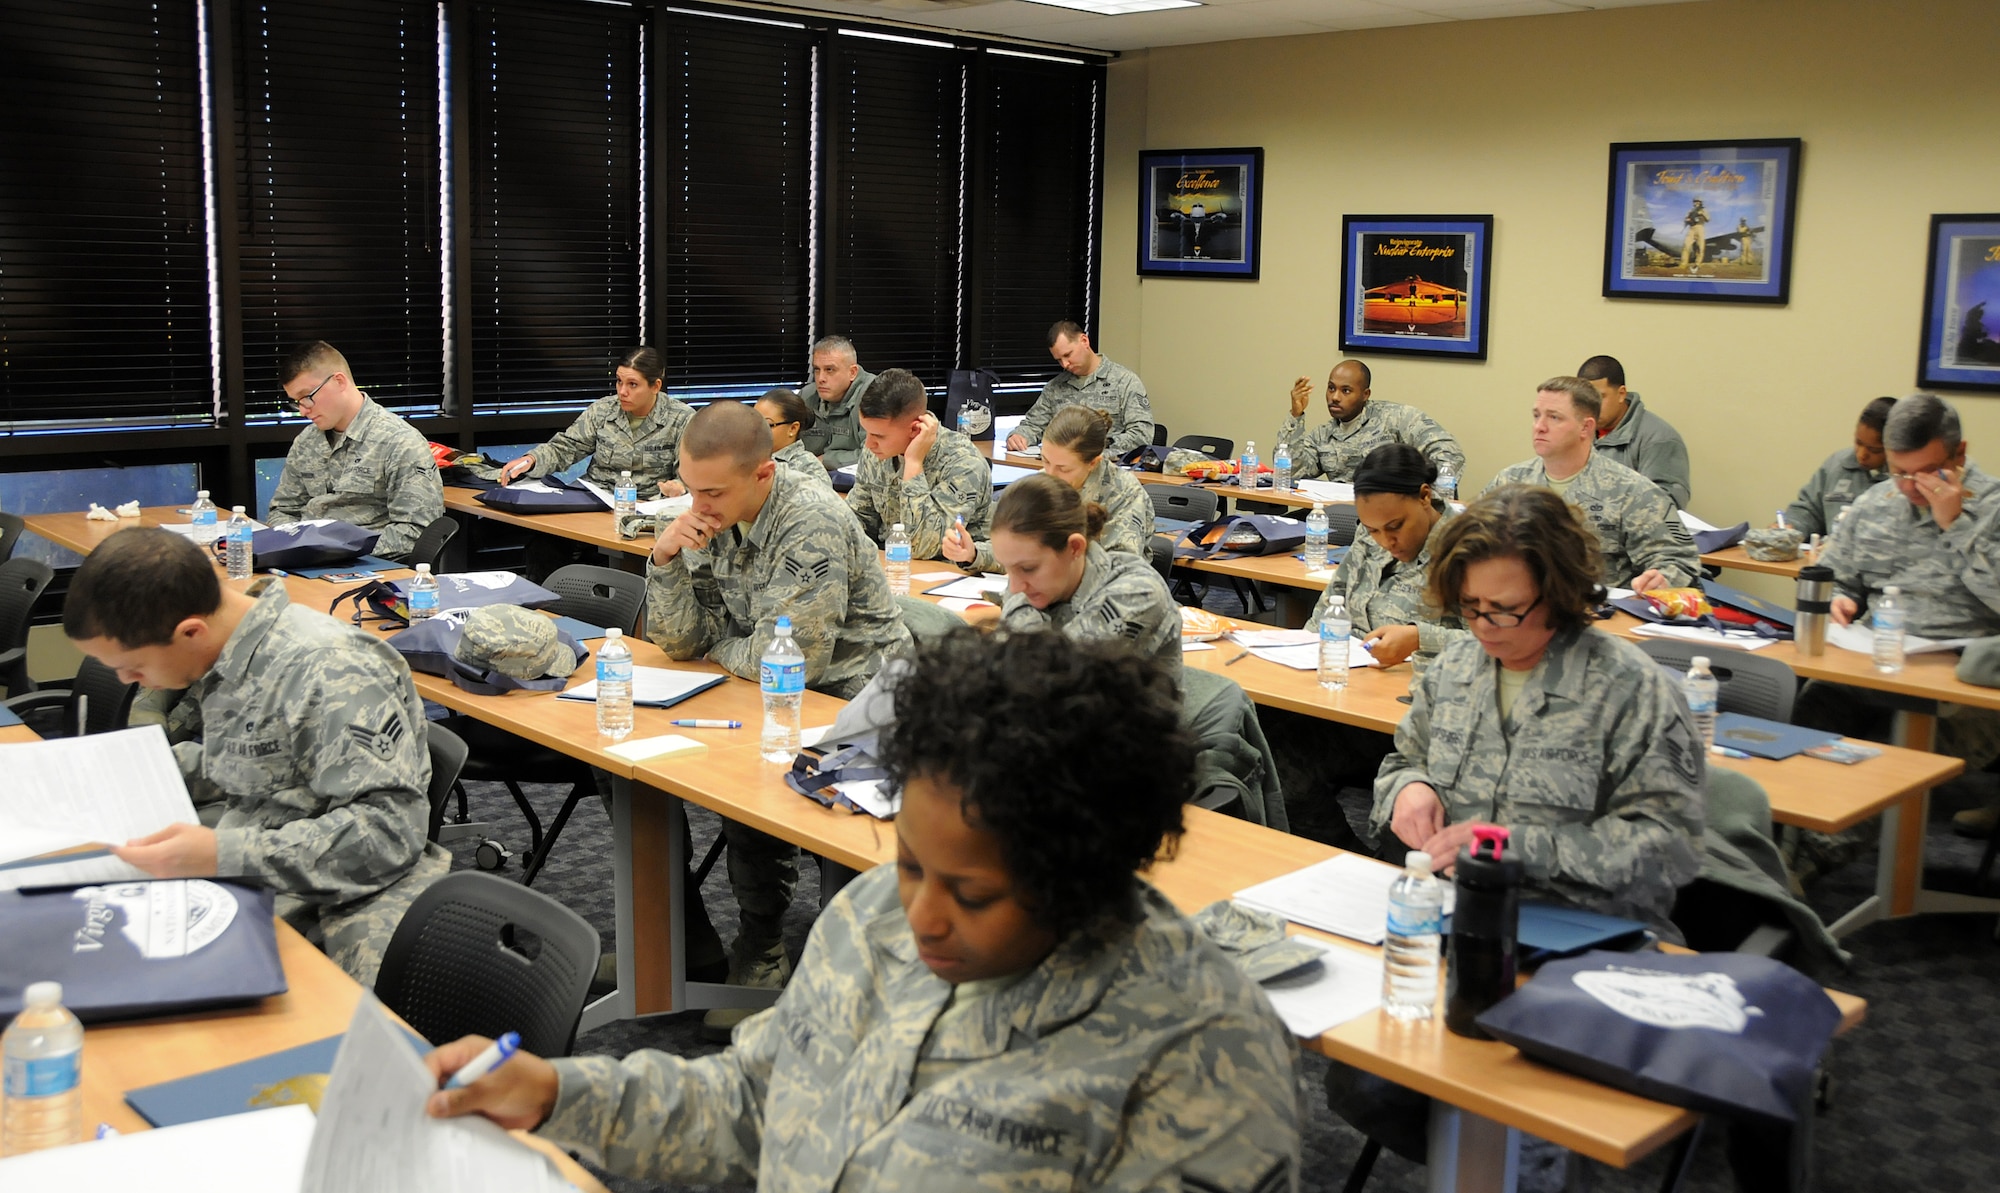 Ms. Angeli Wade, 192nd Fighter Wing Airman and Family Readiness Programs Manager, provides pre-separation counseling to Air National Guard members and Air Force Reservists considering separation or retirement from the military, Jan. 10, 2015 at Langley Air Force Base, Hampton Va.